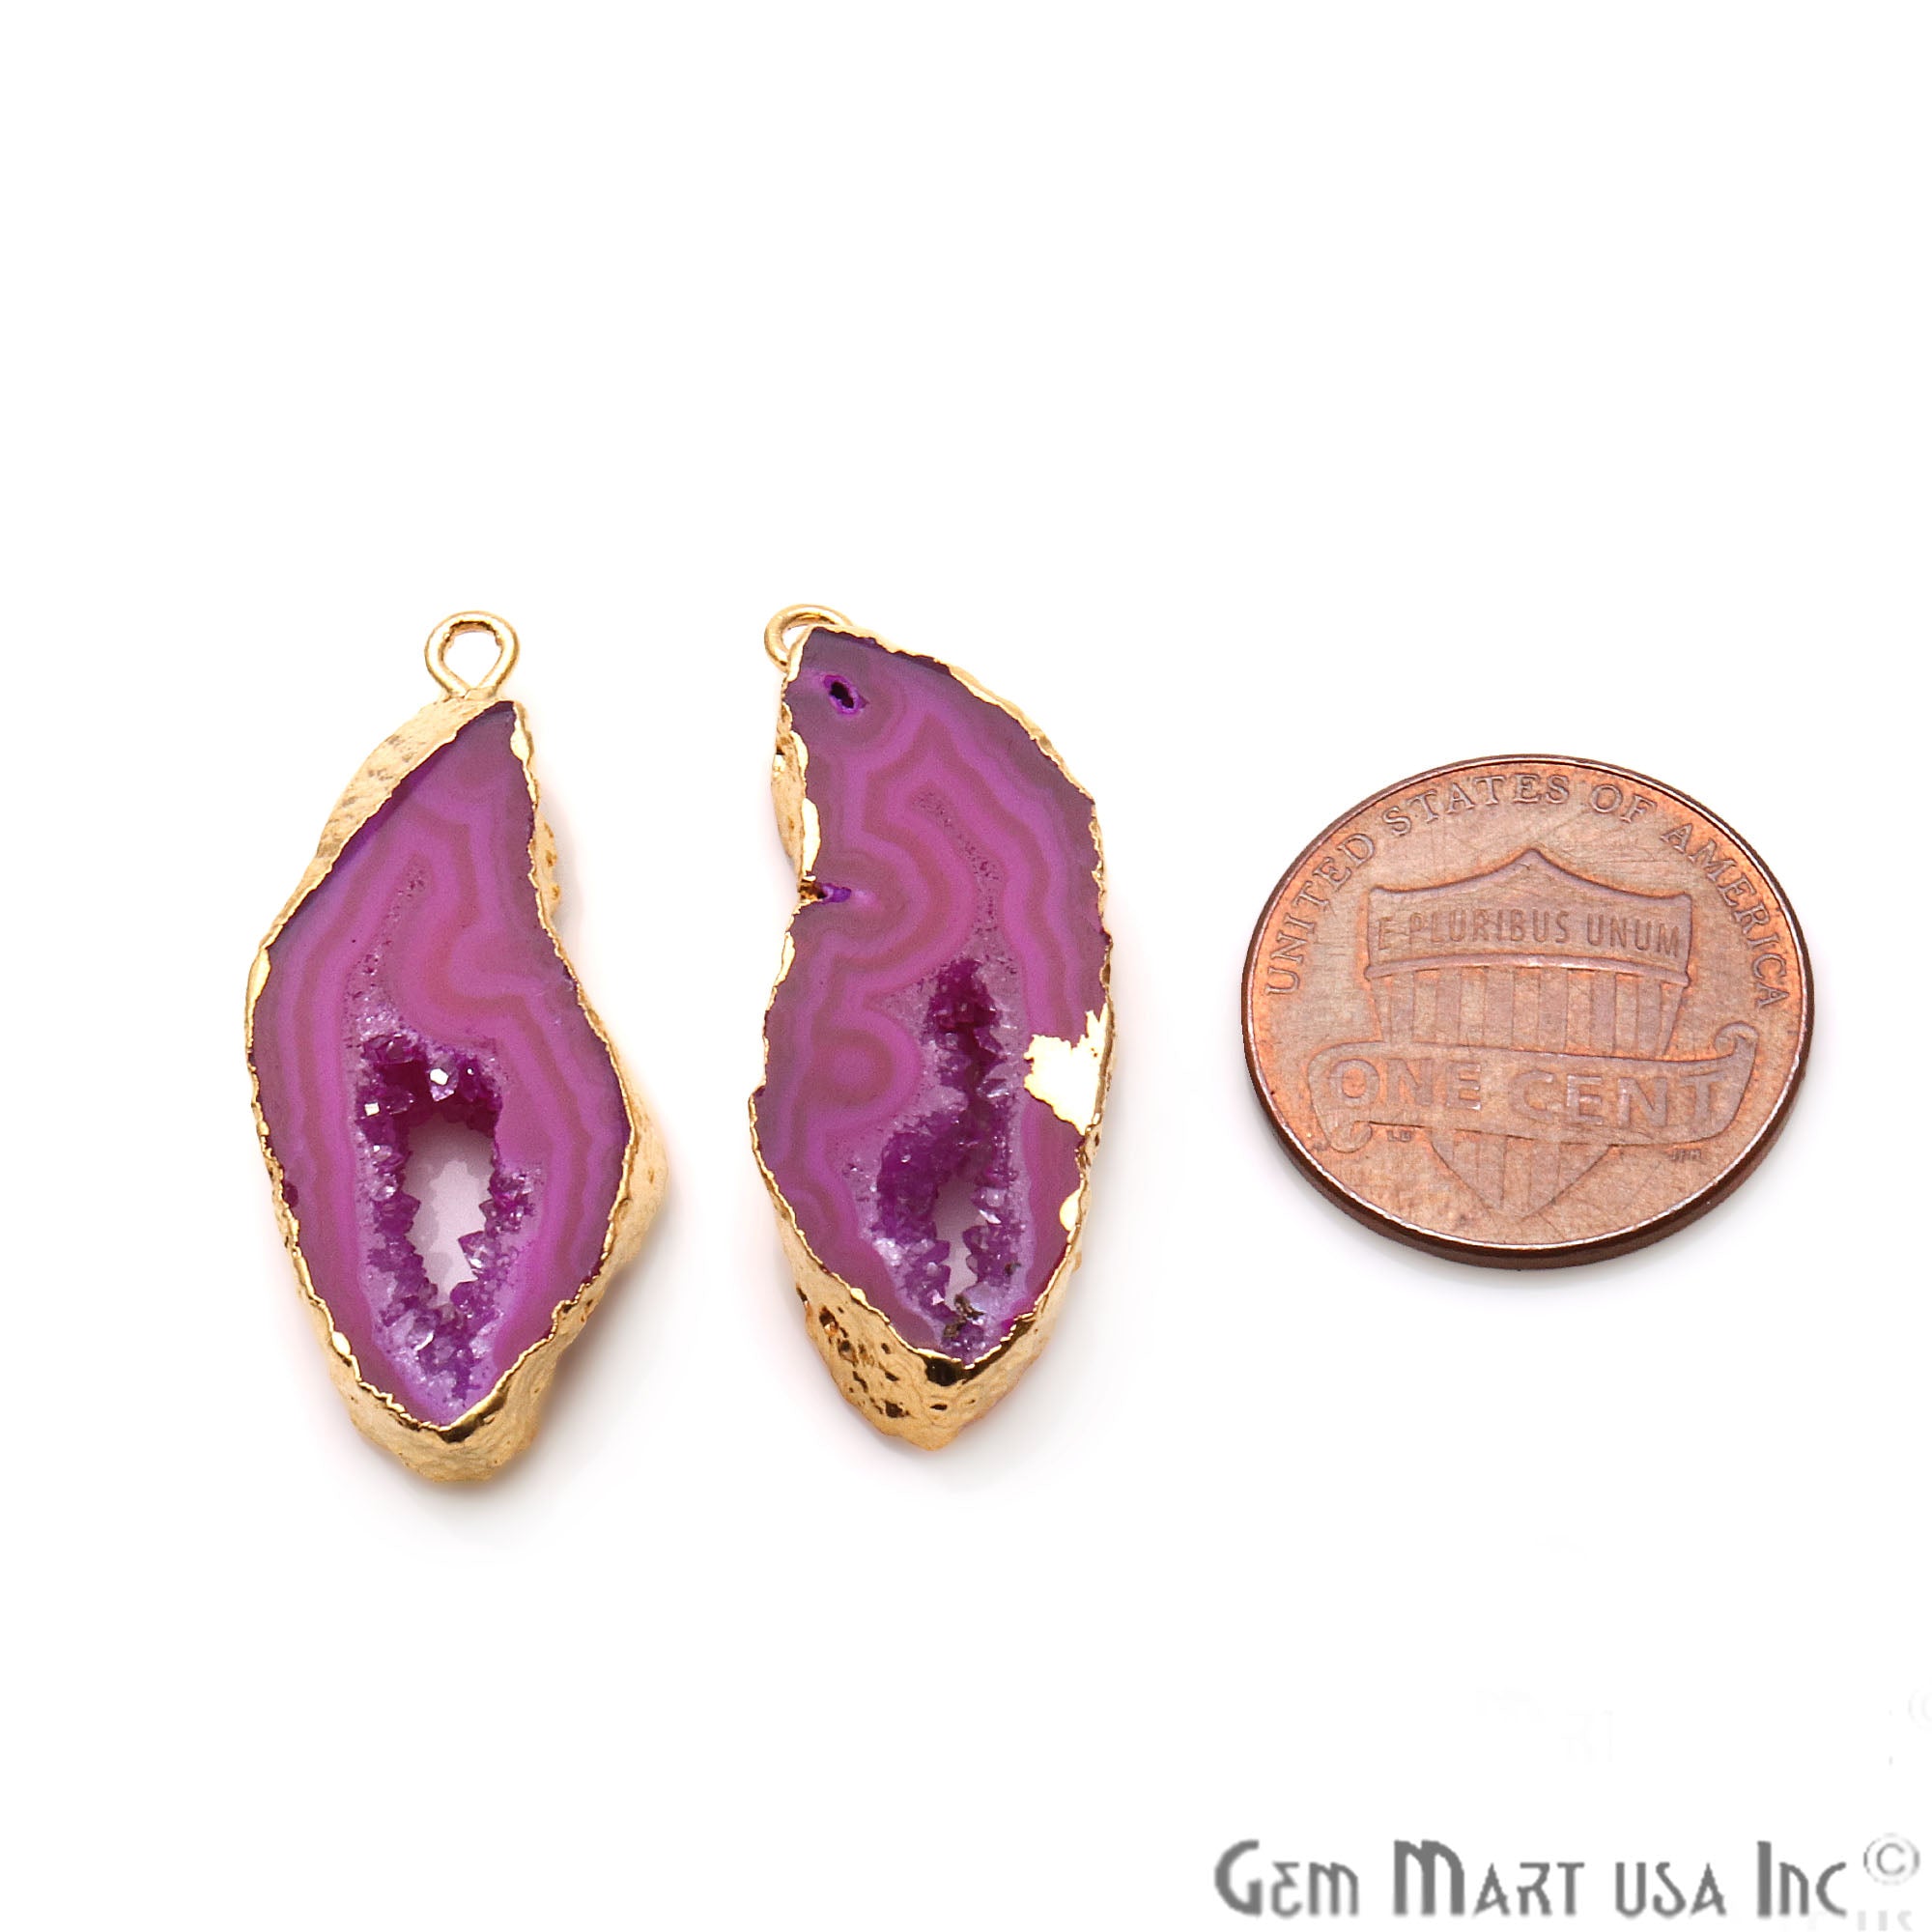 Agate Slice 32x13mm Organic Gold Electroplated Gemstone Earring Connector 1 Pair - GemMartUSA